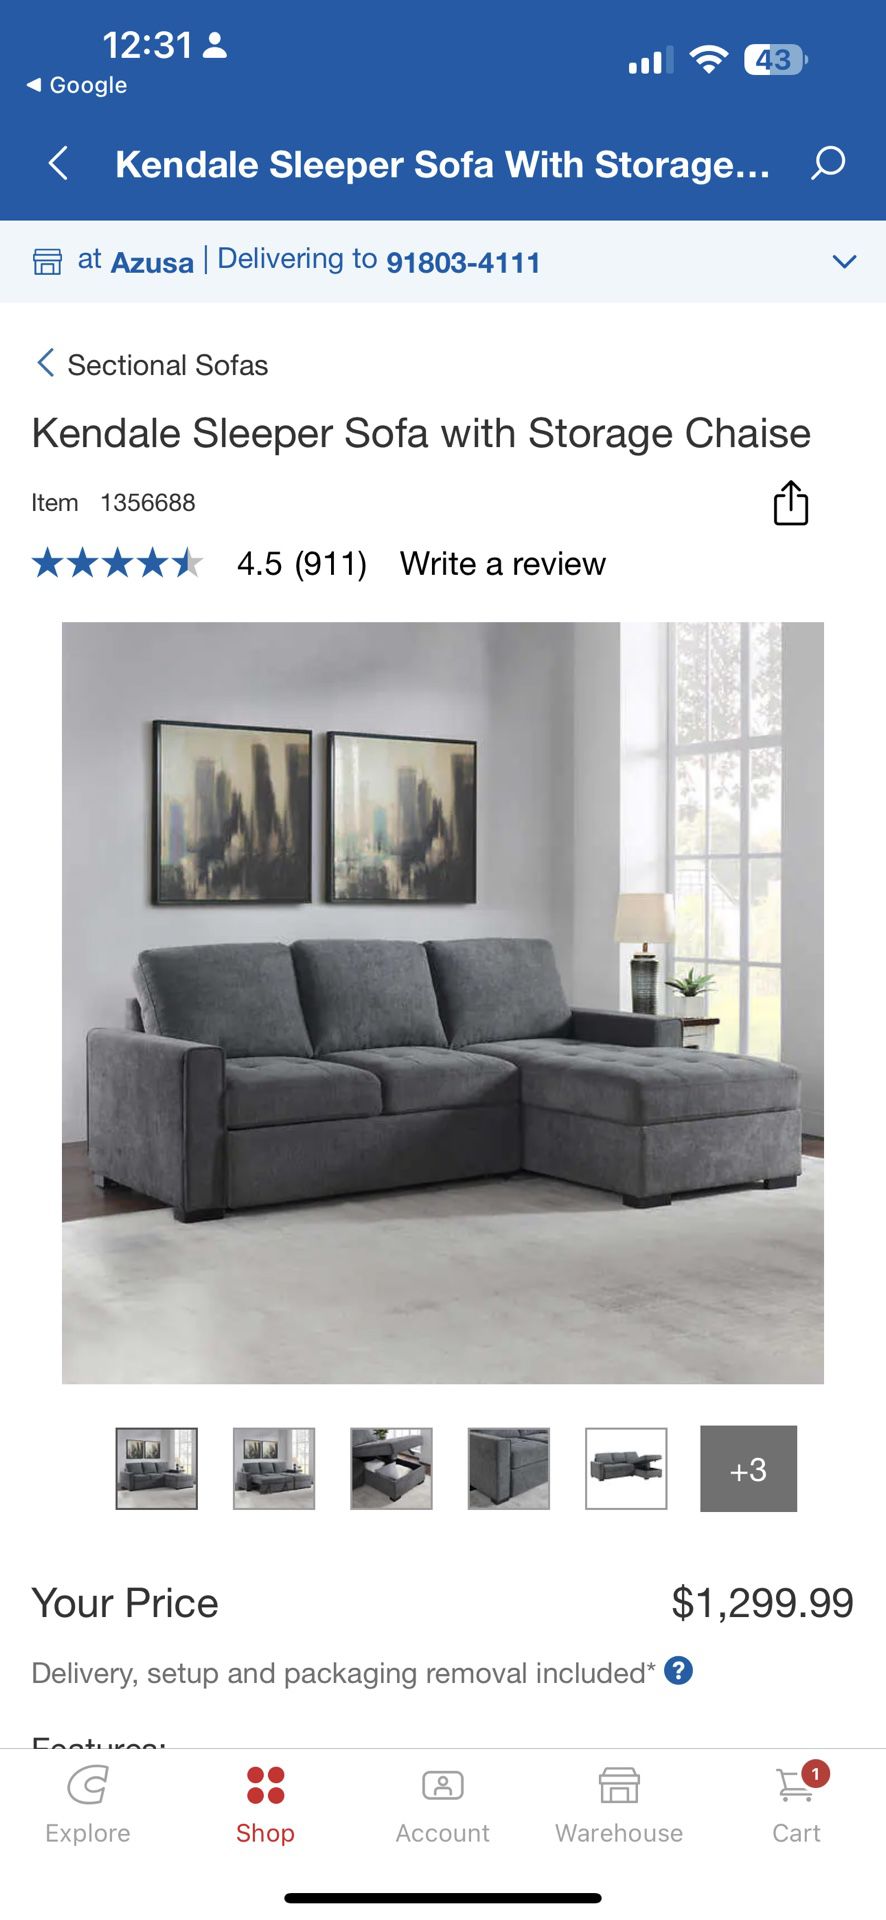  Costco Kendale Sleeper Sofa with Storage Chaise